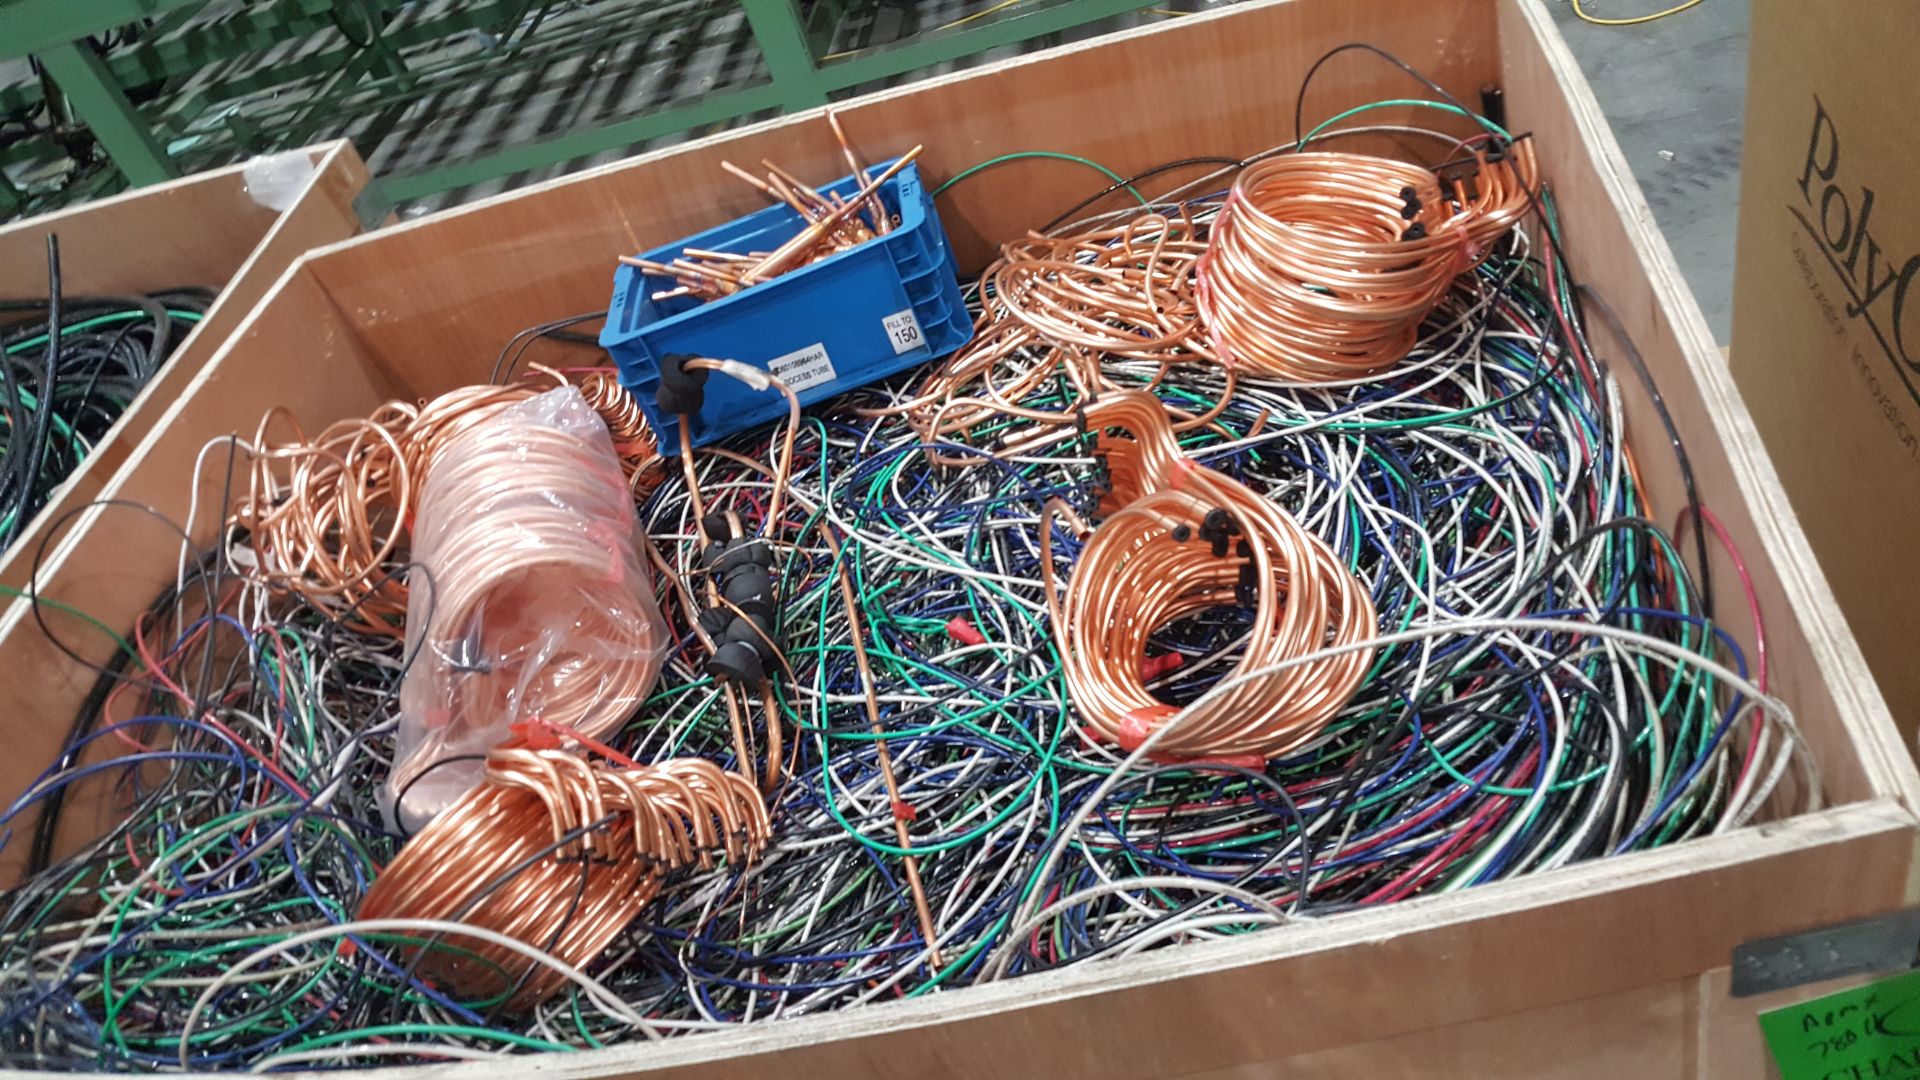 Lot of (2) wood crate with copper cable (different sizes), 1135 & 780 lb gross weight/Caja con - Image 2 of 2